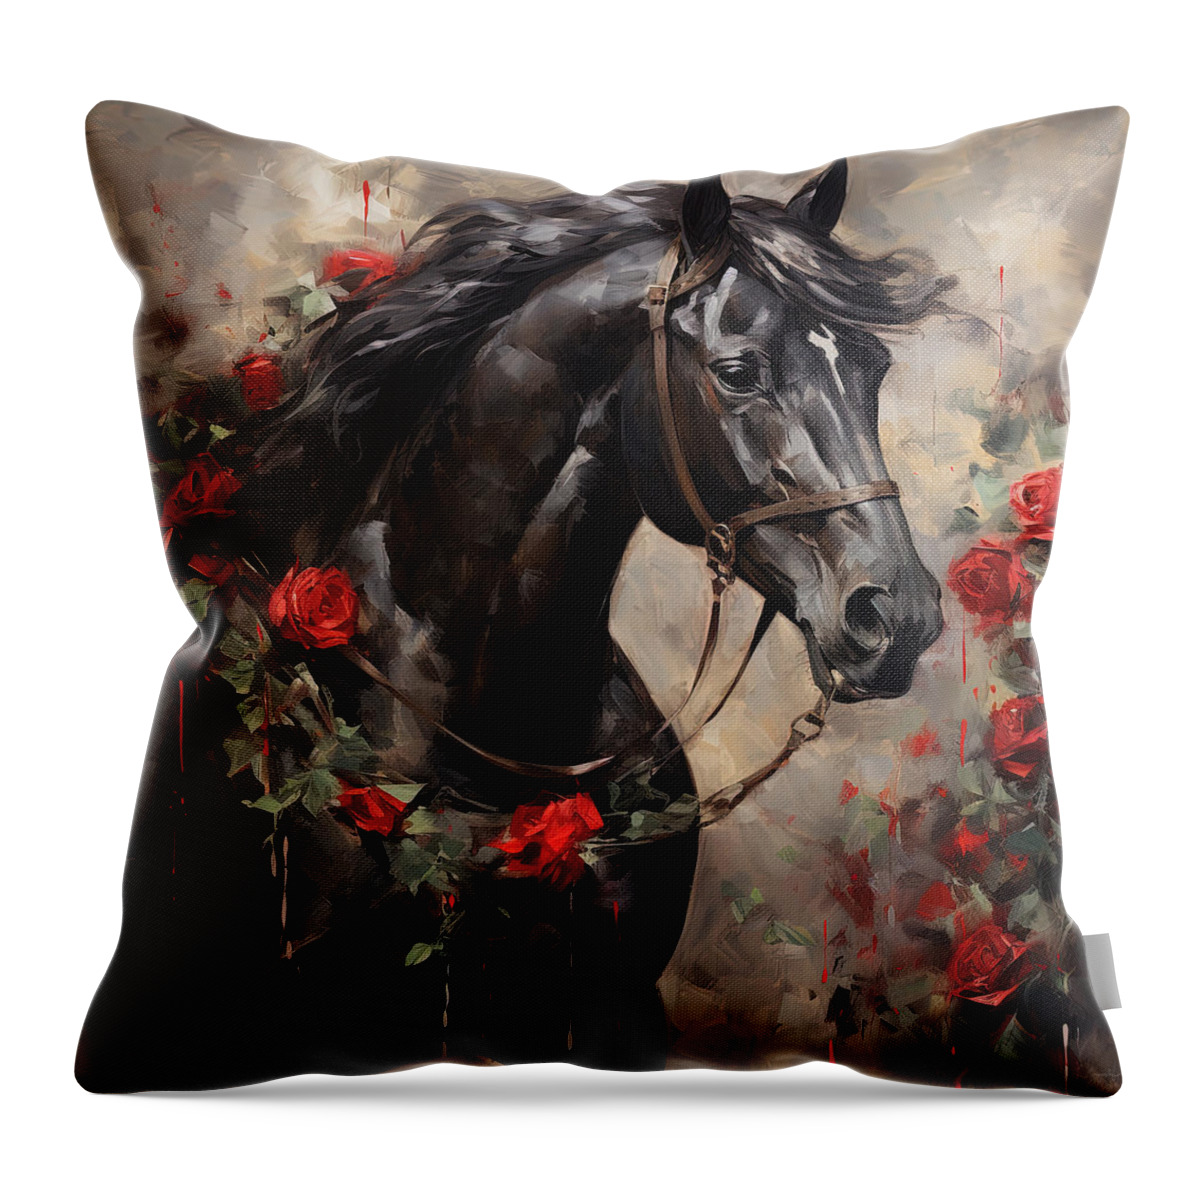 Horse With Roses Throw Pillow featuring the painting Race Day Glory by Lourry Legarde